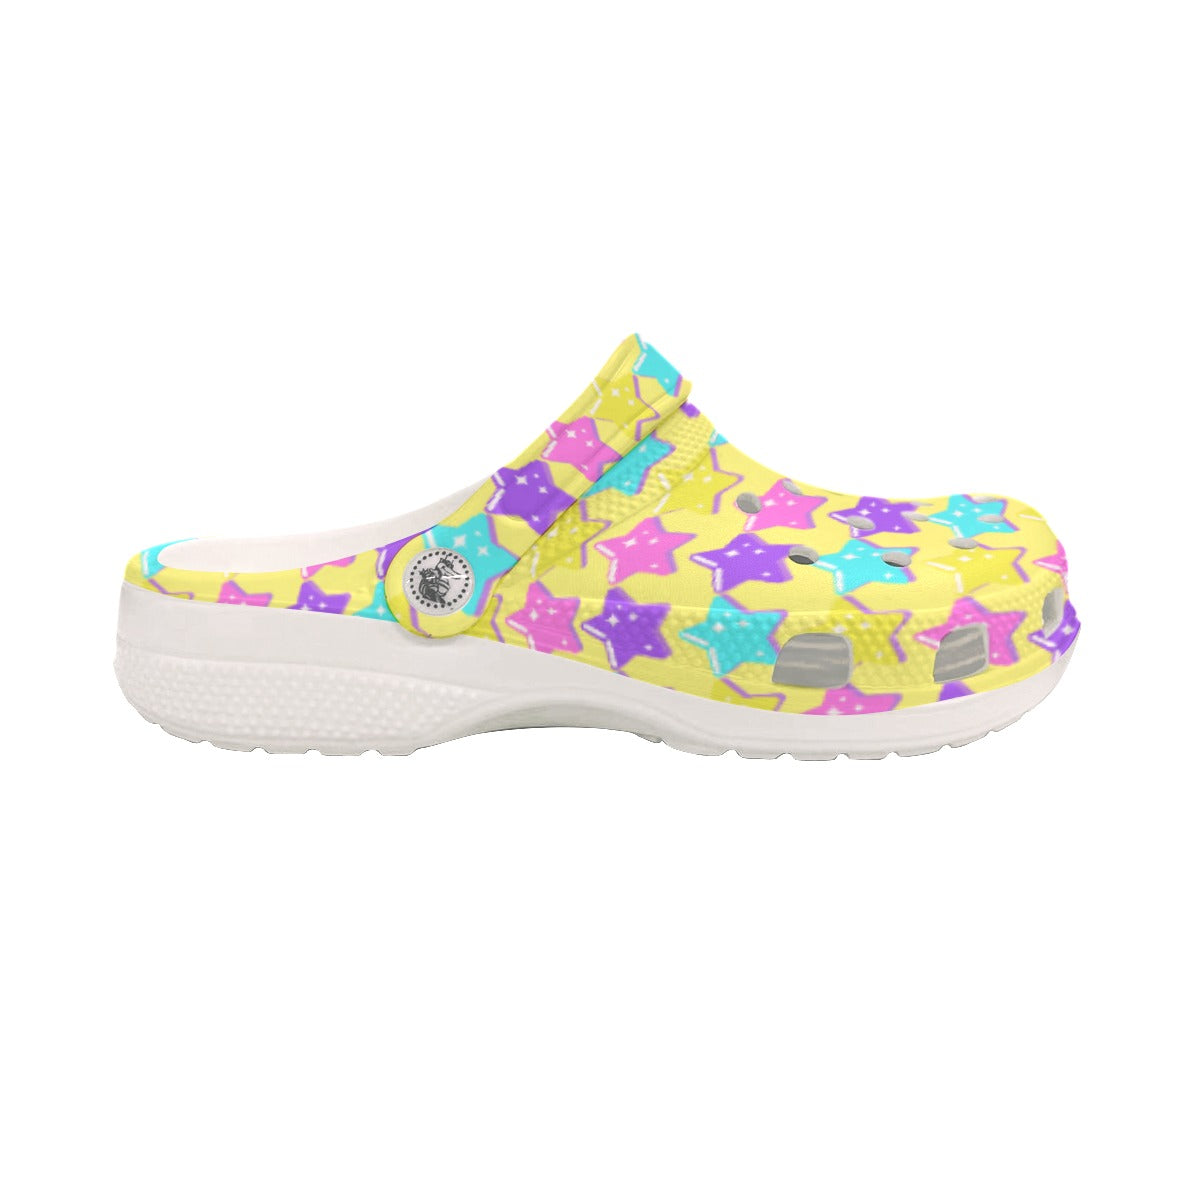 Electric Star Wave Yellow Classic Clogs Women's Shoes